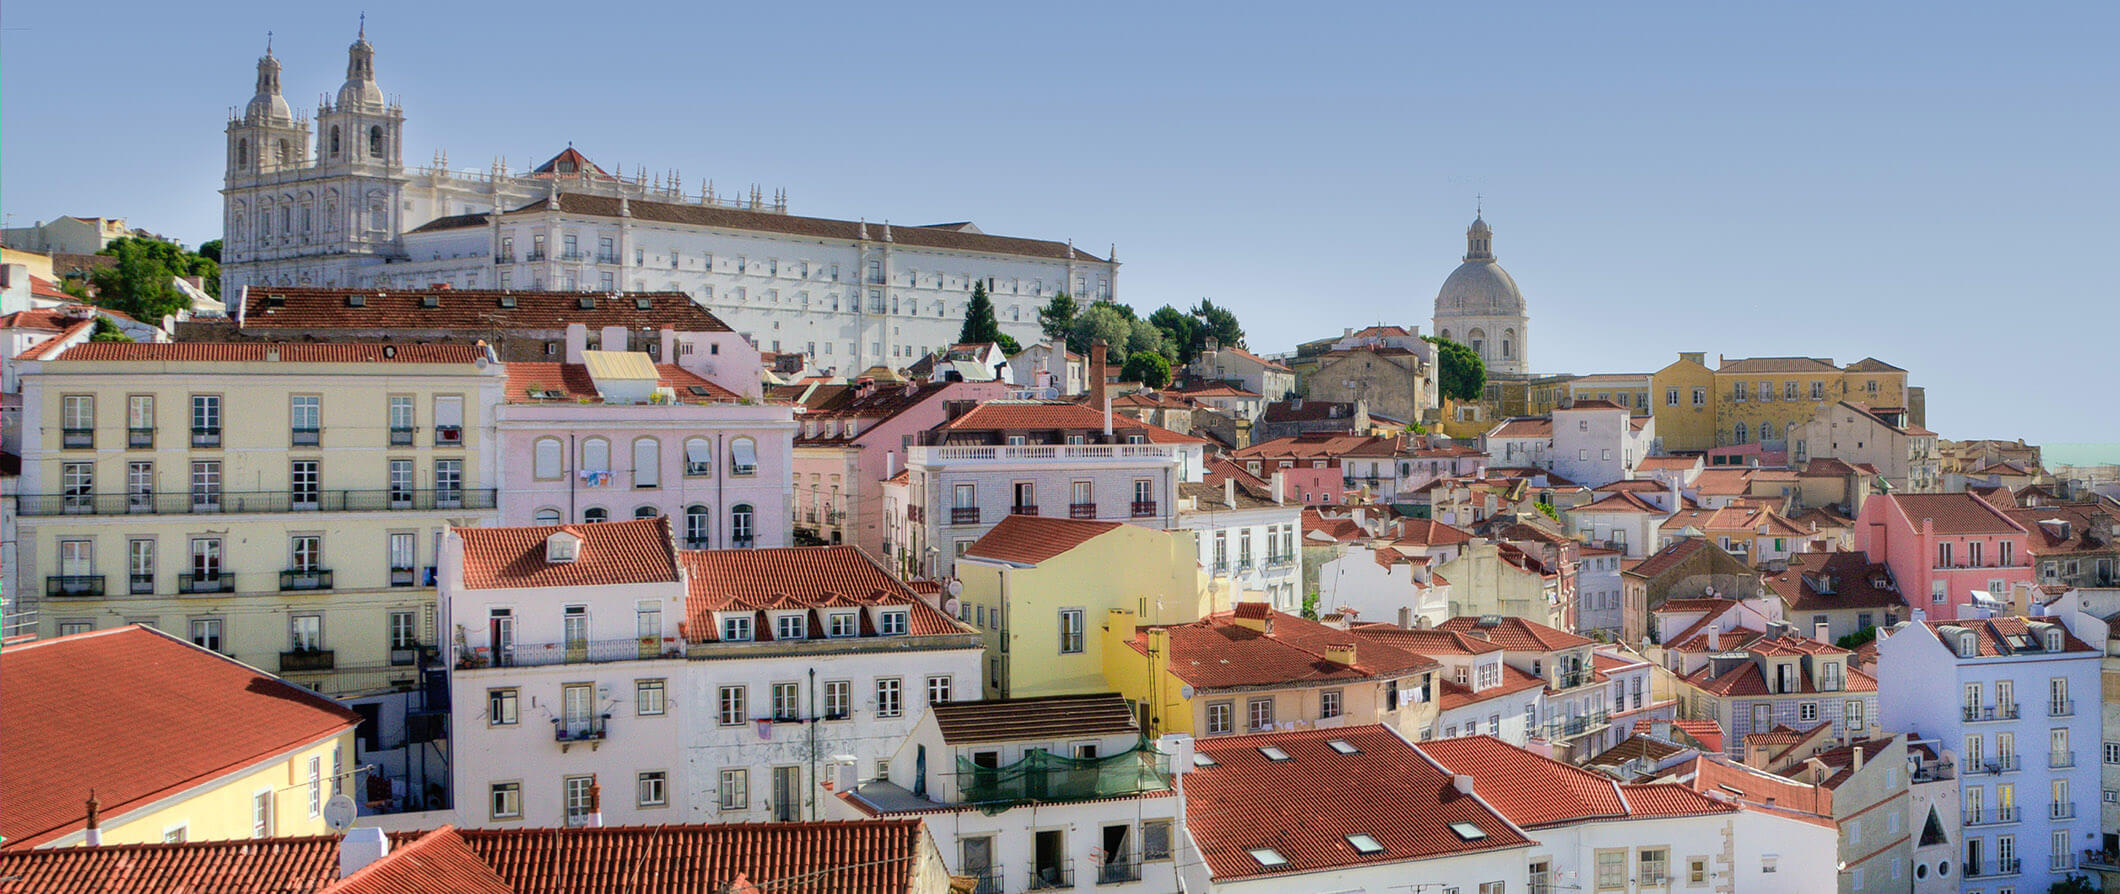 City view of Lisbon. Colorful buildings on a hill